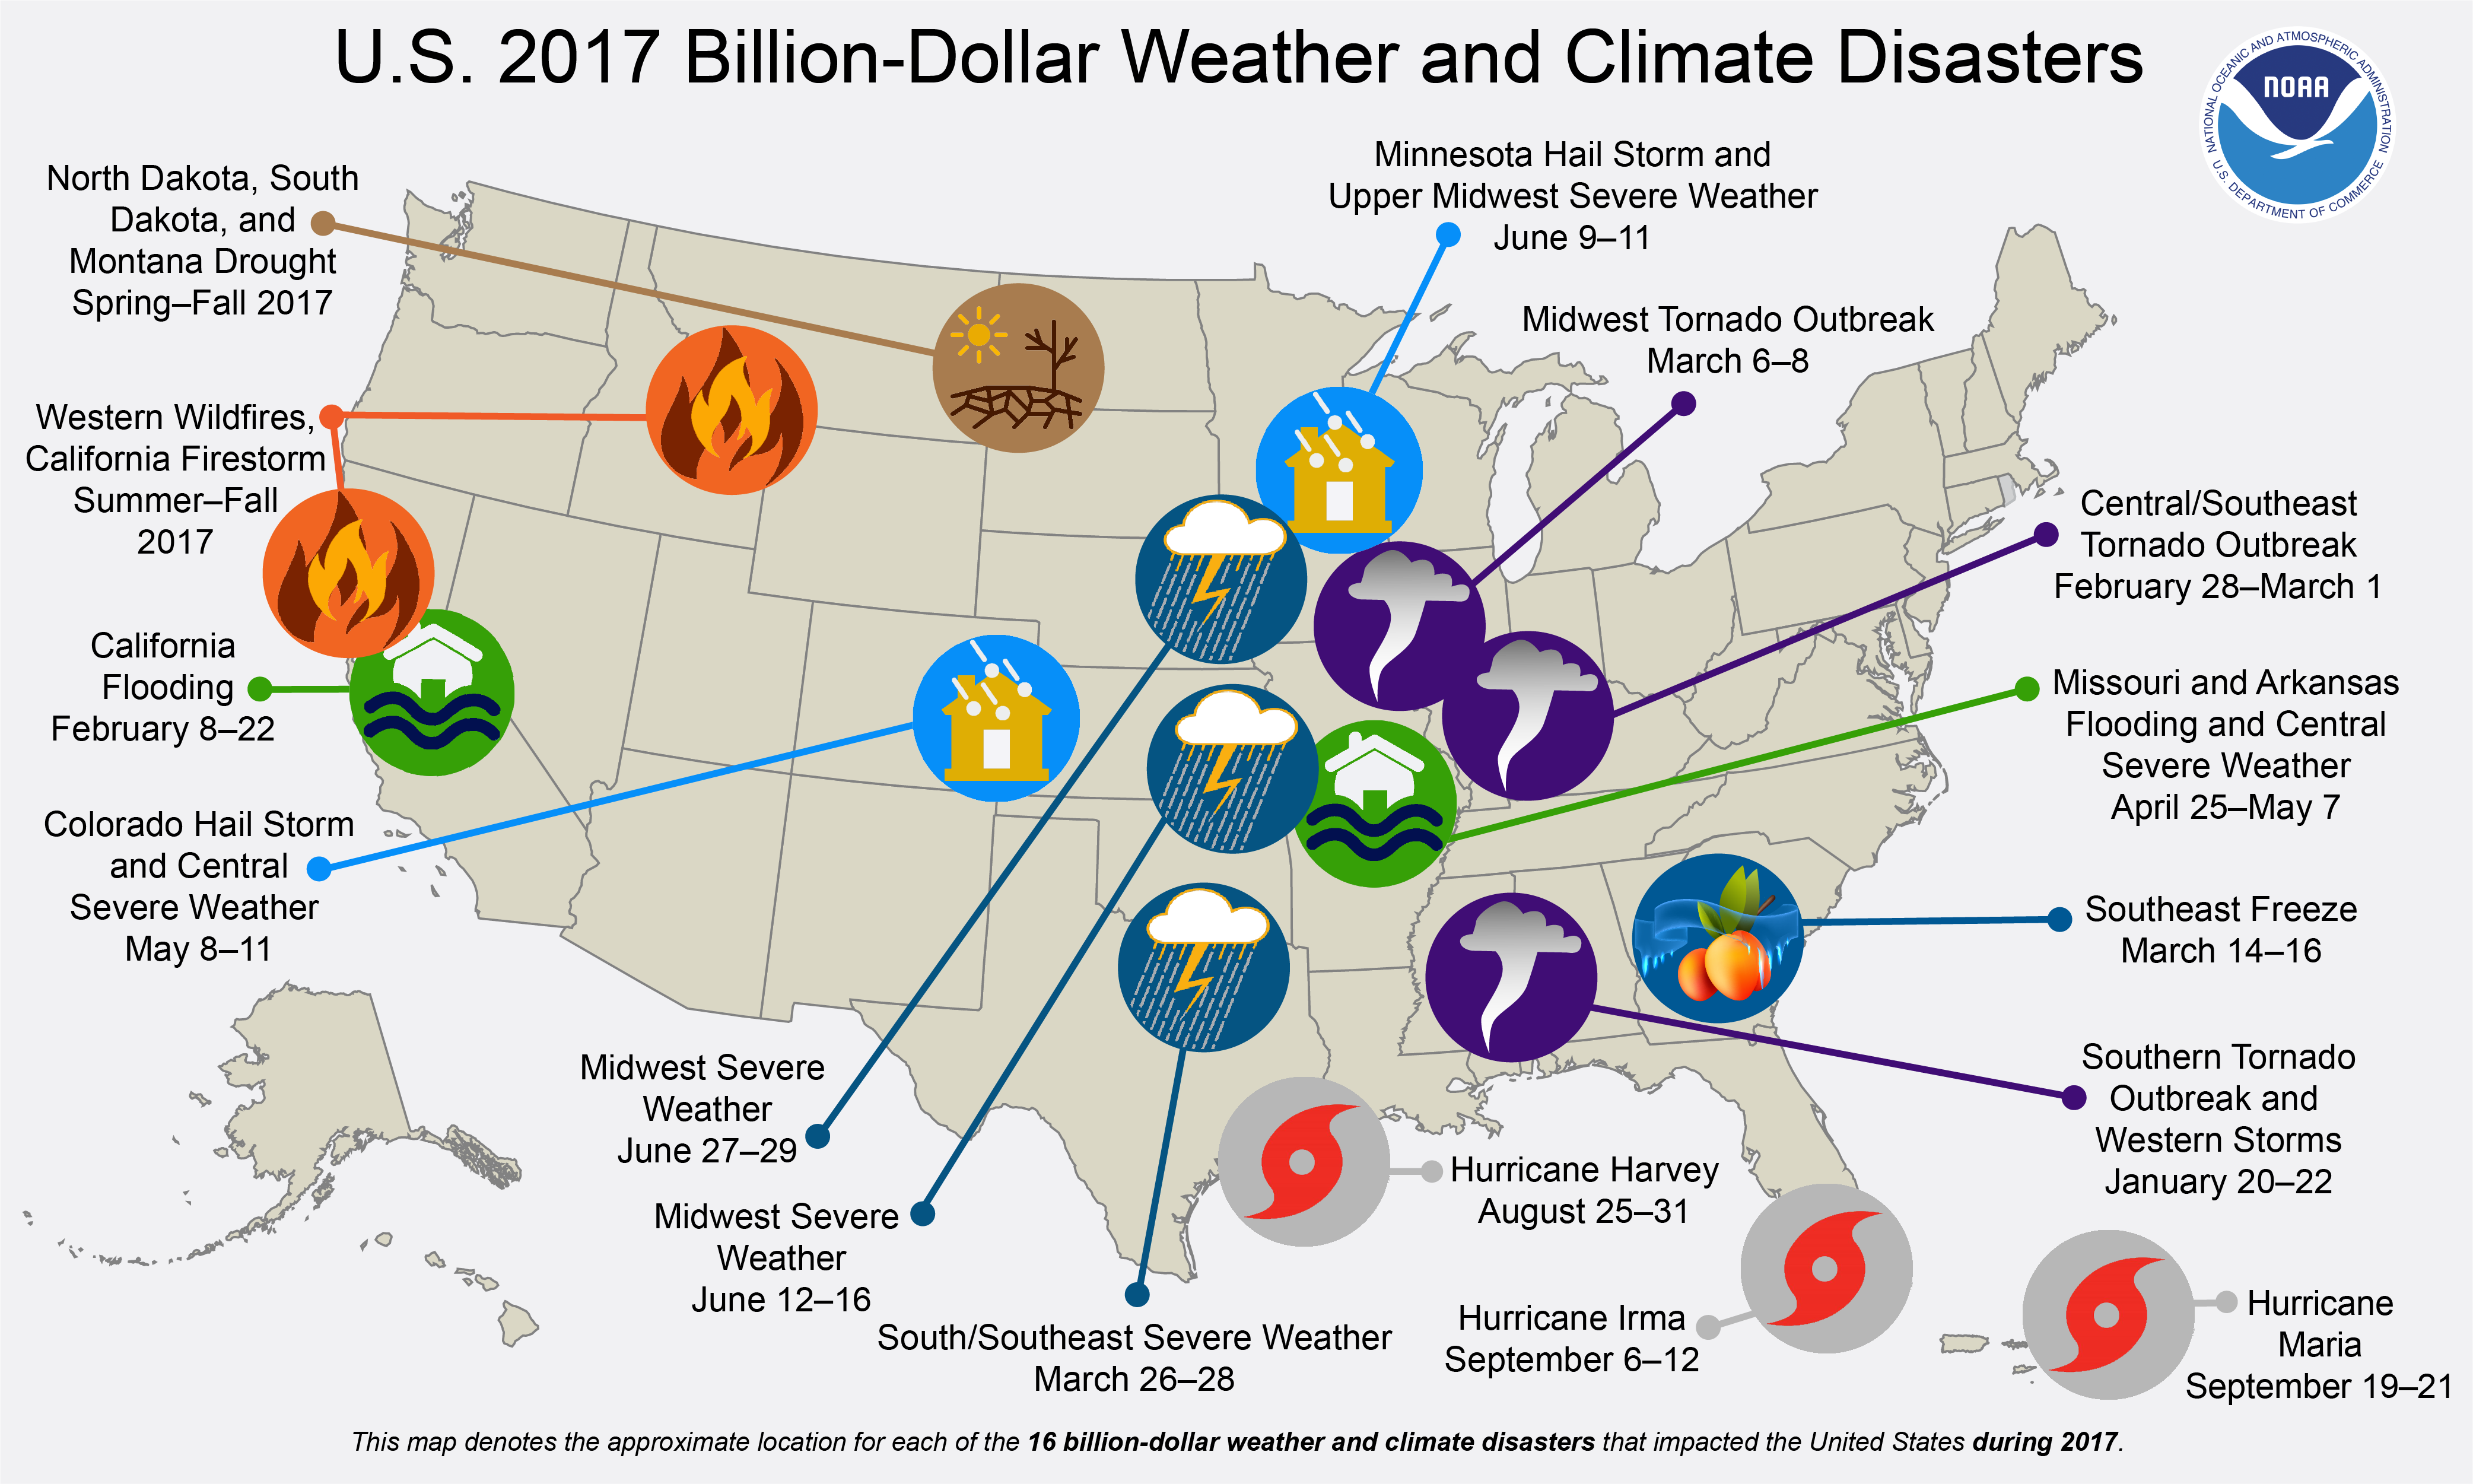 Here's a U.S. map plotted with 16  billion-dollar weather and climate disasters that occurred in 2017.